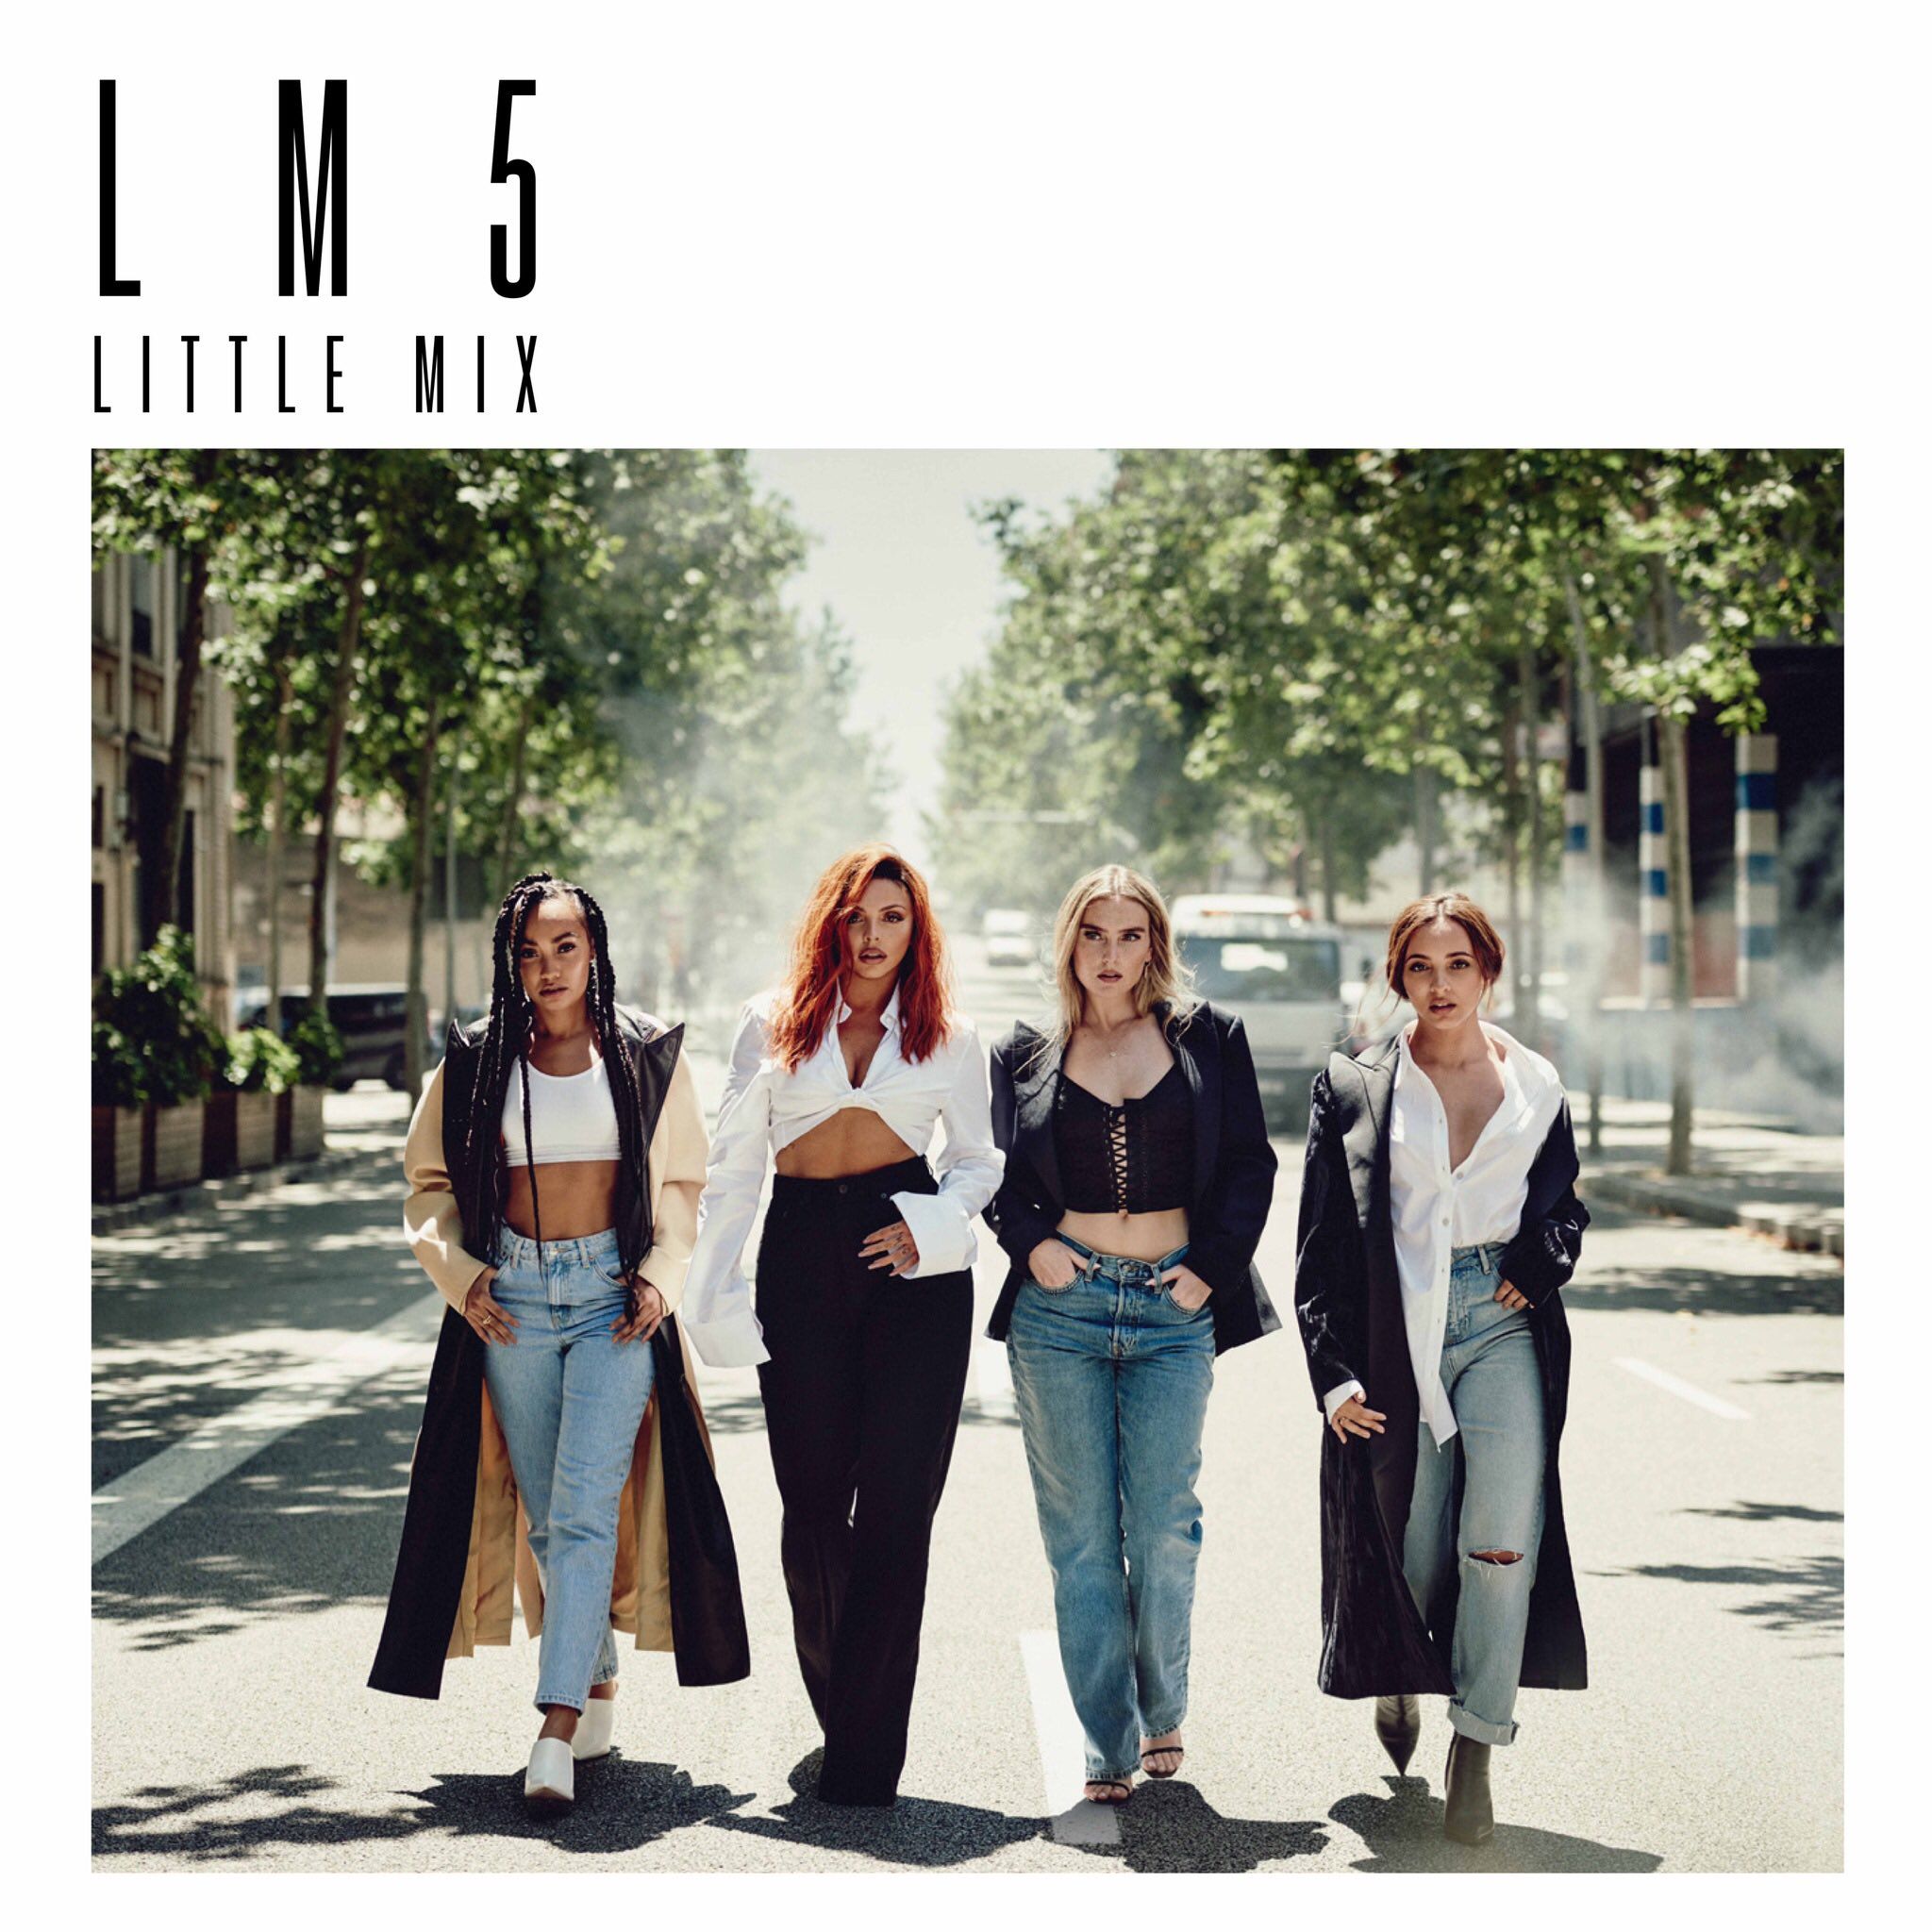 Little Mix's New Album 'LM5': Release Date, Title, Tracklist & More